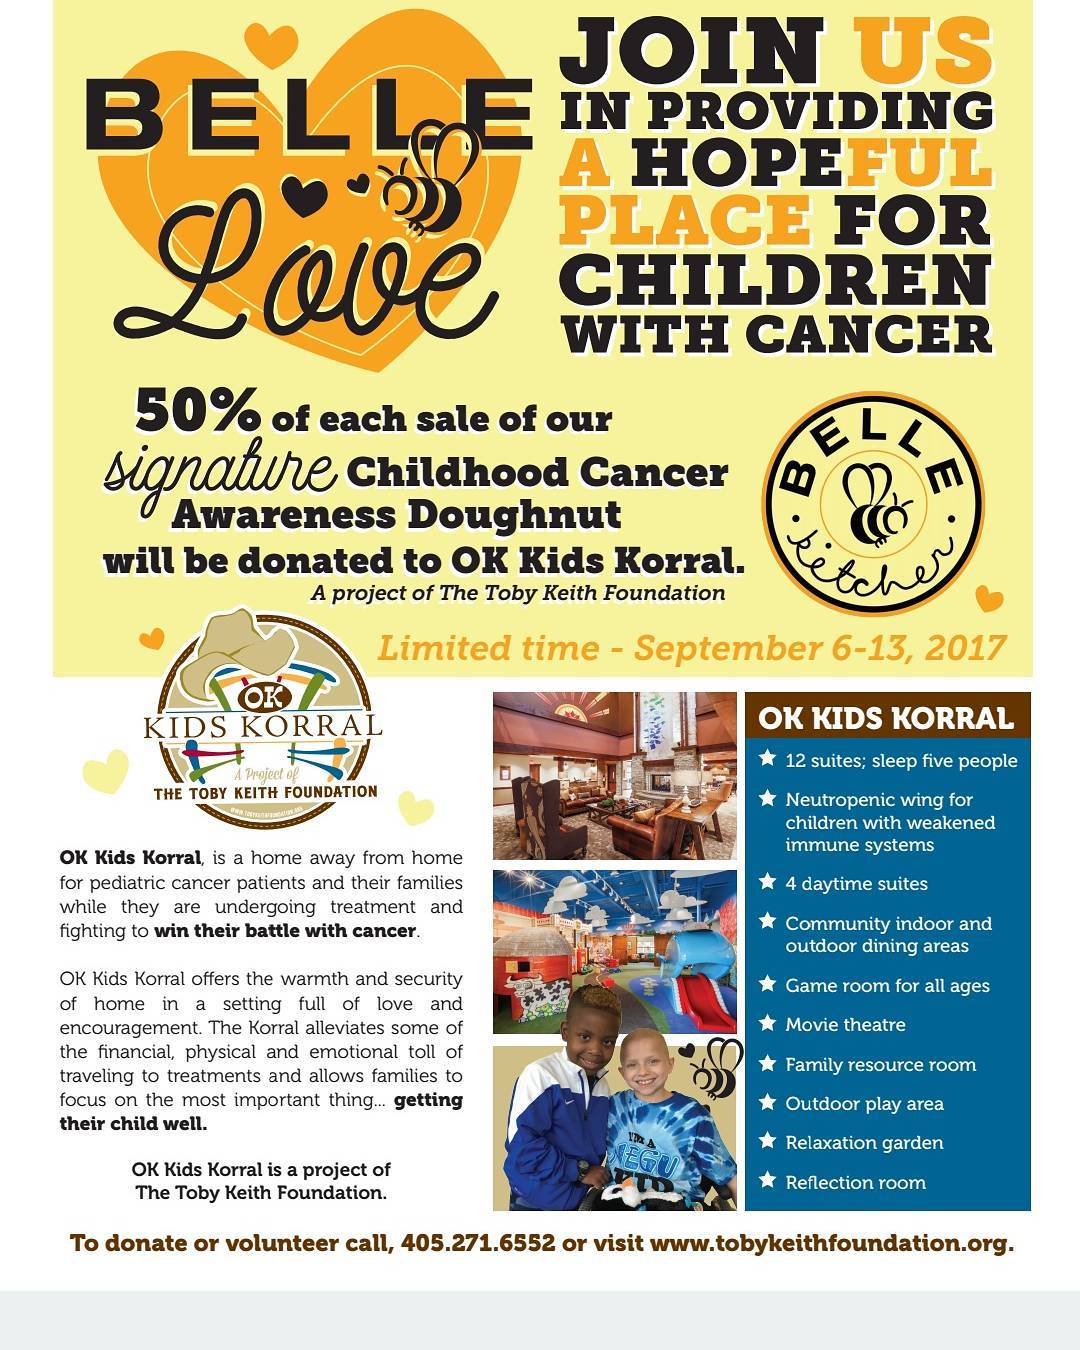 September is Childhood Cancer Awareness month and we are honored to be supporting The Toby Keith Foundation with a a signature doughnut from Sept
6th to 13th where 50% of the sale of each doughnut will go directly to the Foundation. 
For over three years, The Toby Keith Foundation has been welcoming guests to OK Kids Korral. The Korral is a place to call home during cancer treatments. 
Please consider supporting this worthy cause – to find out more visit their website at www.tobykeithfoundation.org
@bellekitchenokc @tobykeith #cancerawareness  #kids #event #doughnut #doughnuts #donut #donuts #okc #keepitlocalok